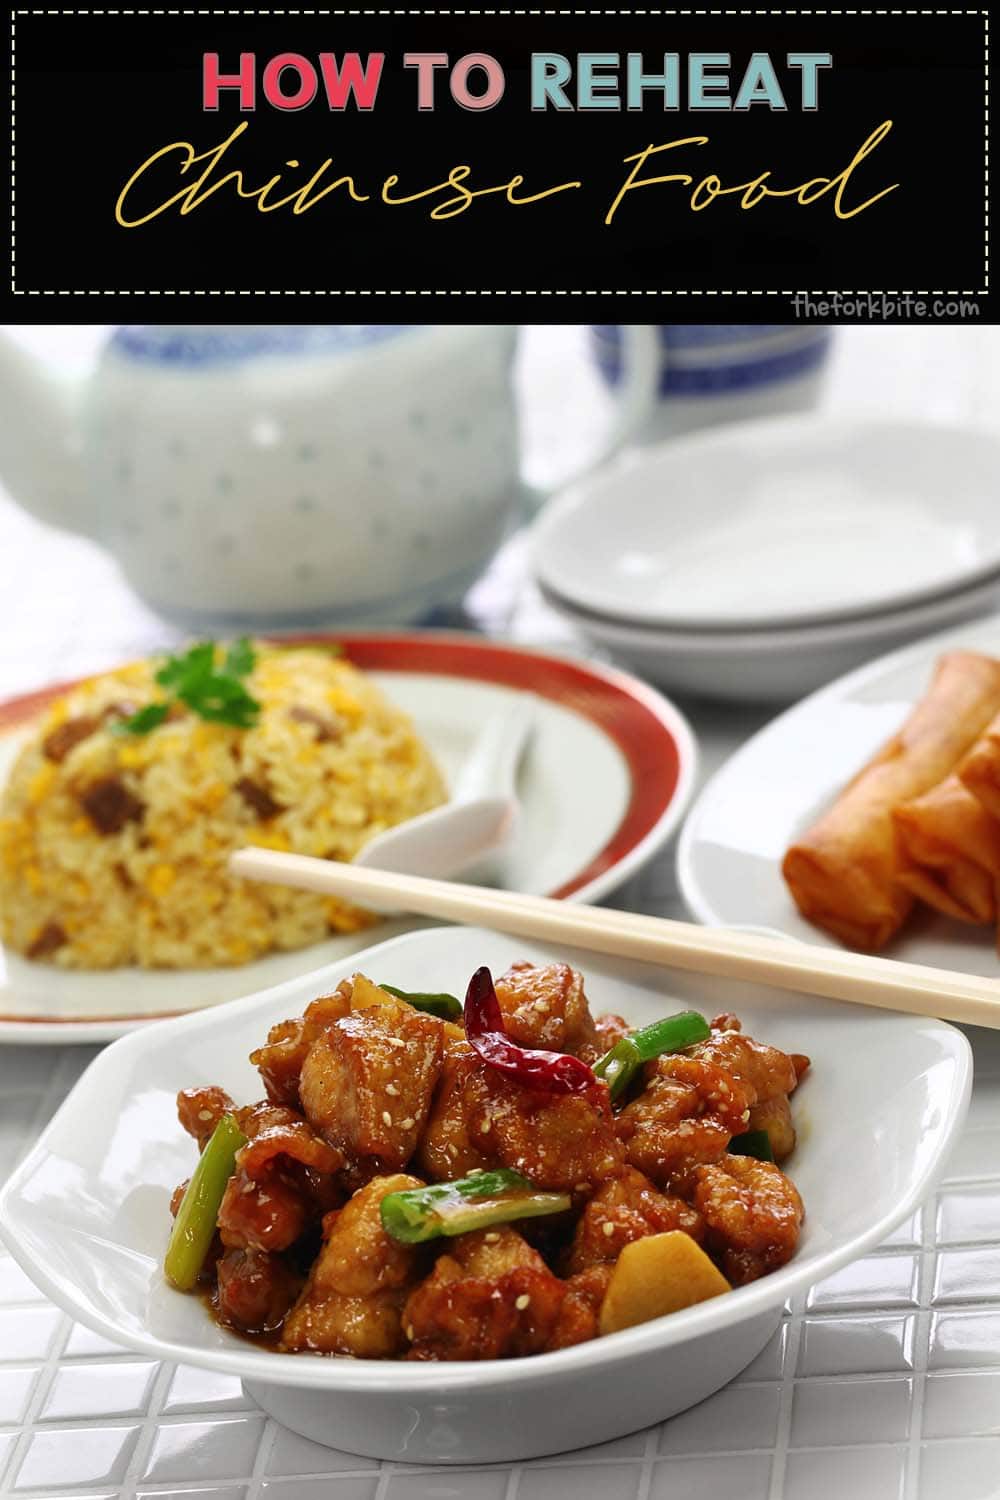 There are methods of reheating Chinese food that allow you to preserve the original texture and flavor.